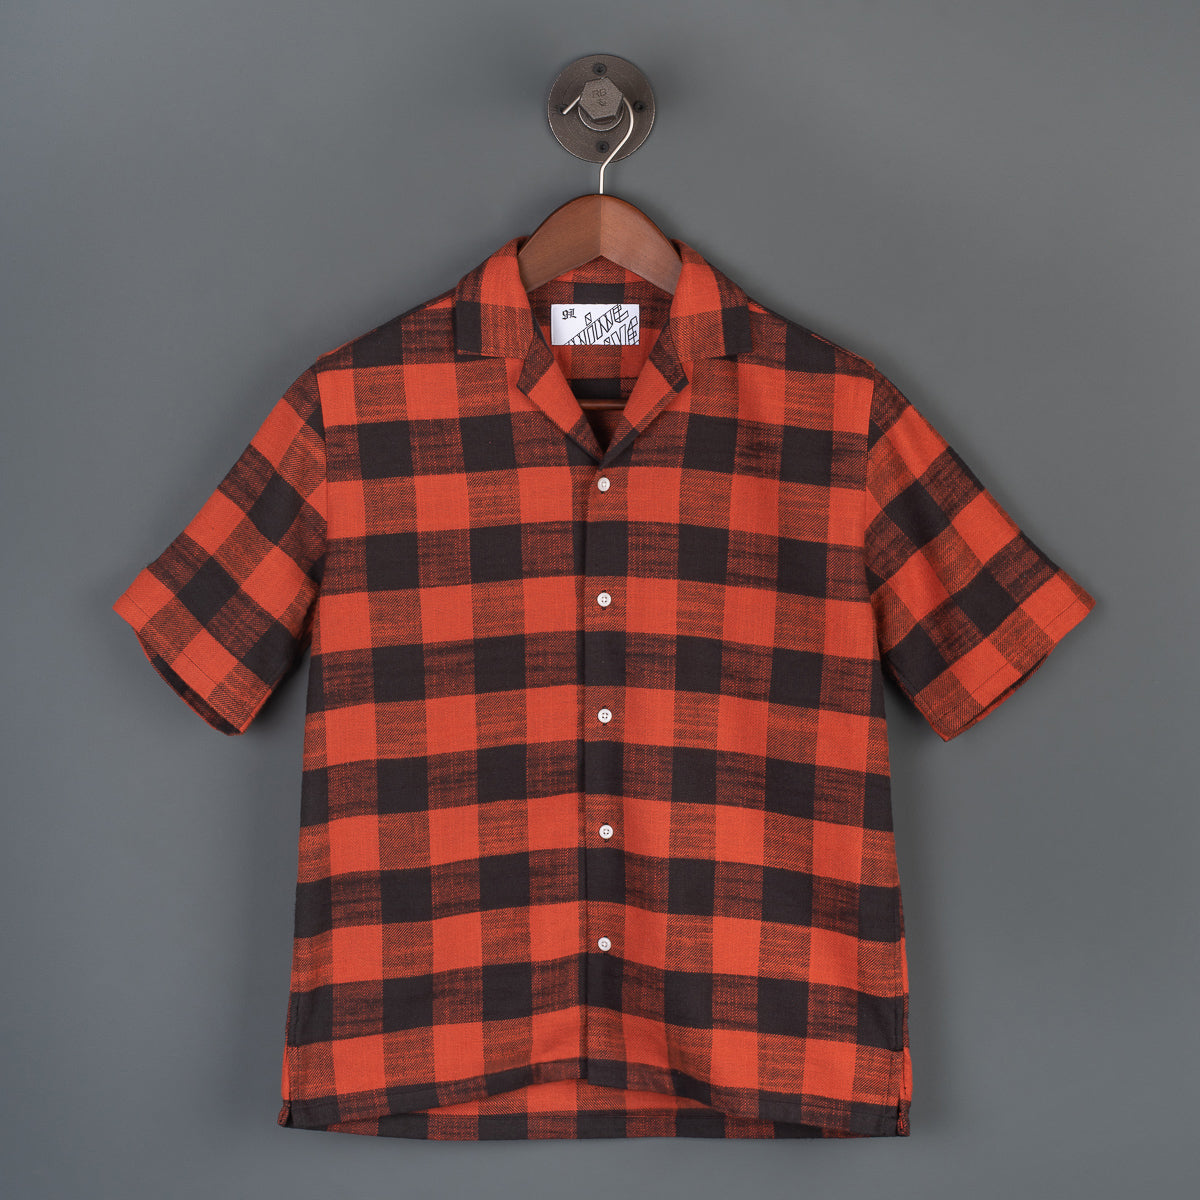 The 405 in Flannel (Short Sleeve) - Red/Black